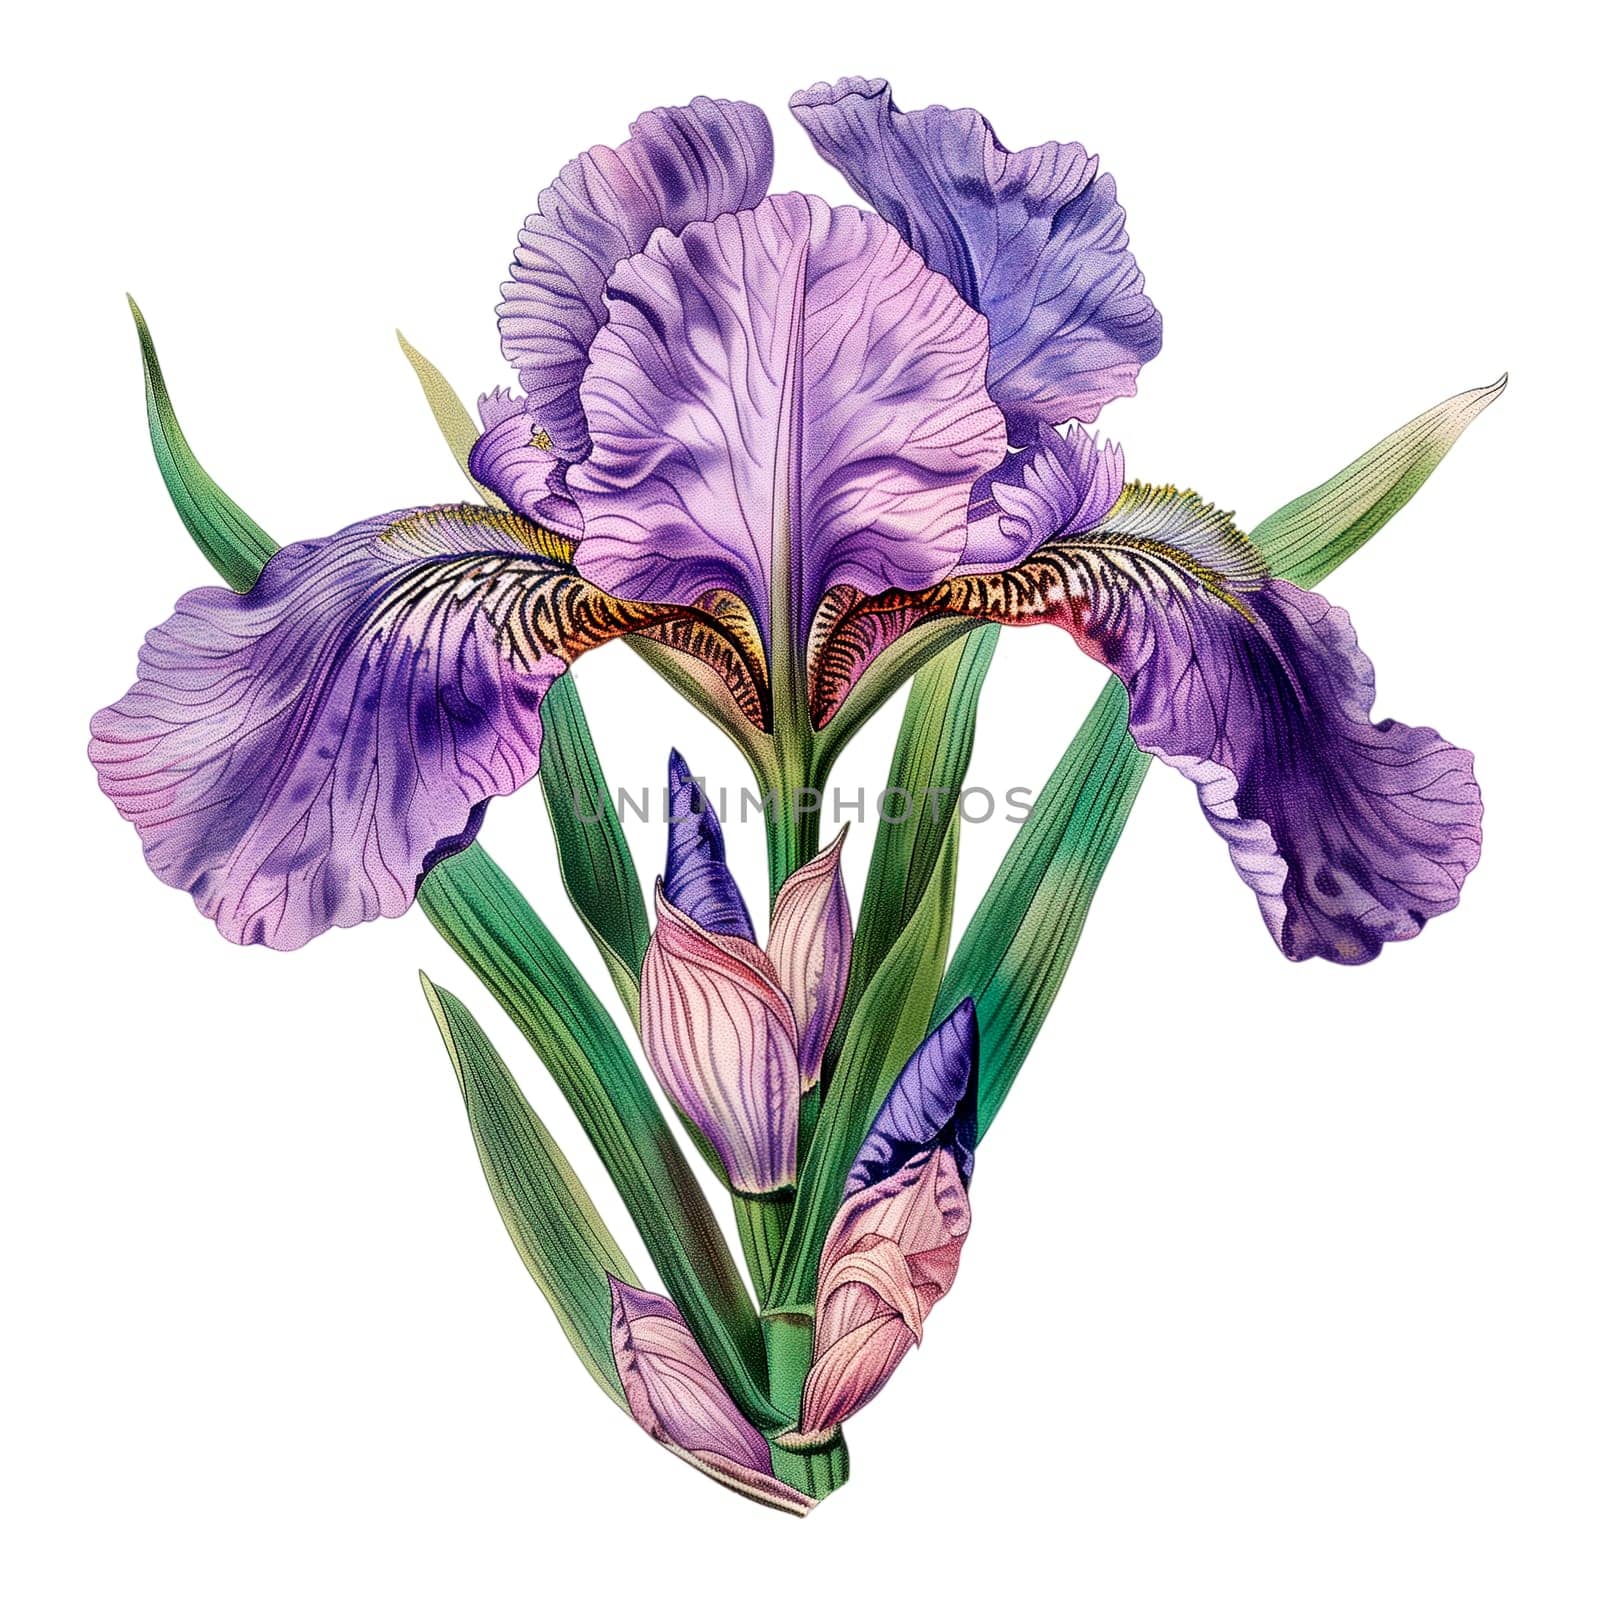 Isolated illustration of Iris flower by Dustick